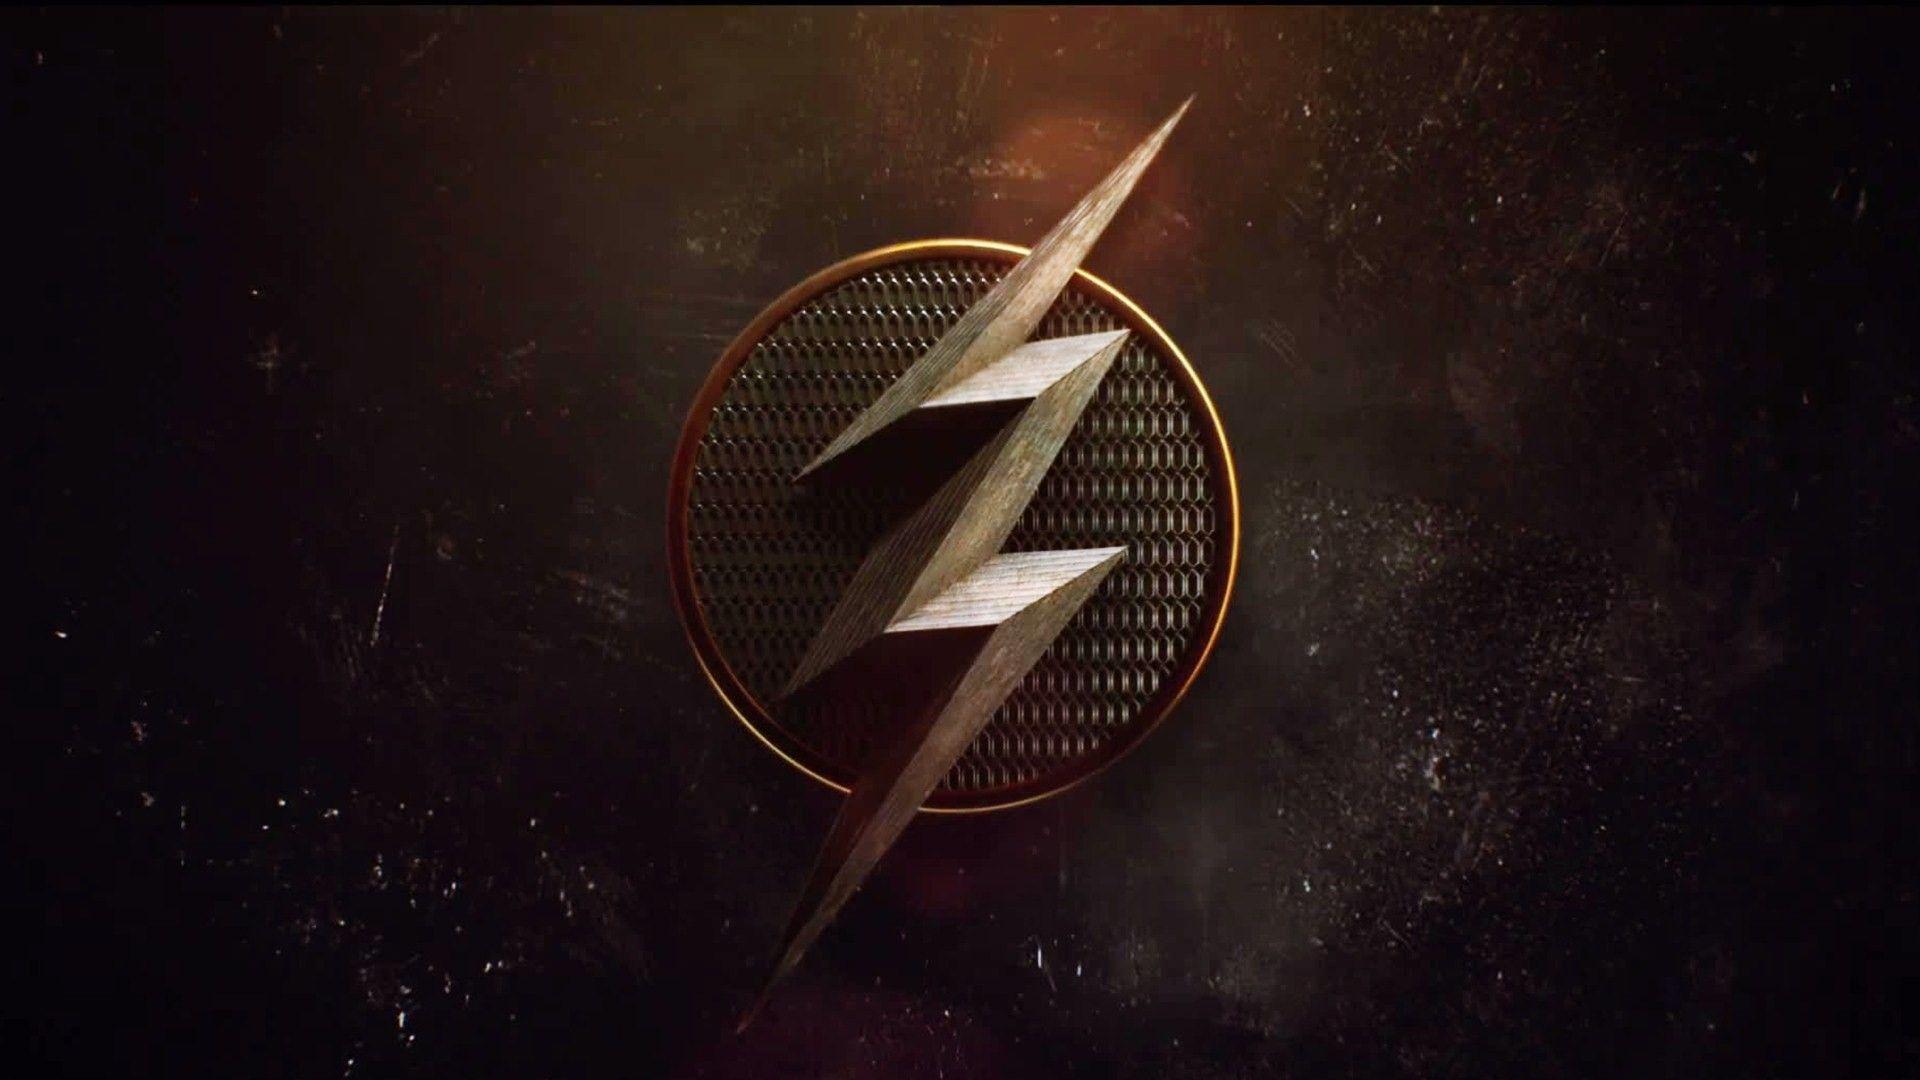 The Flash Zoom 4K Wallpapers - Top Free The Flash Zoom 4K Backgrounds ...